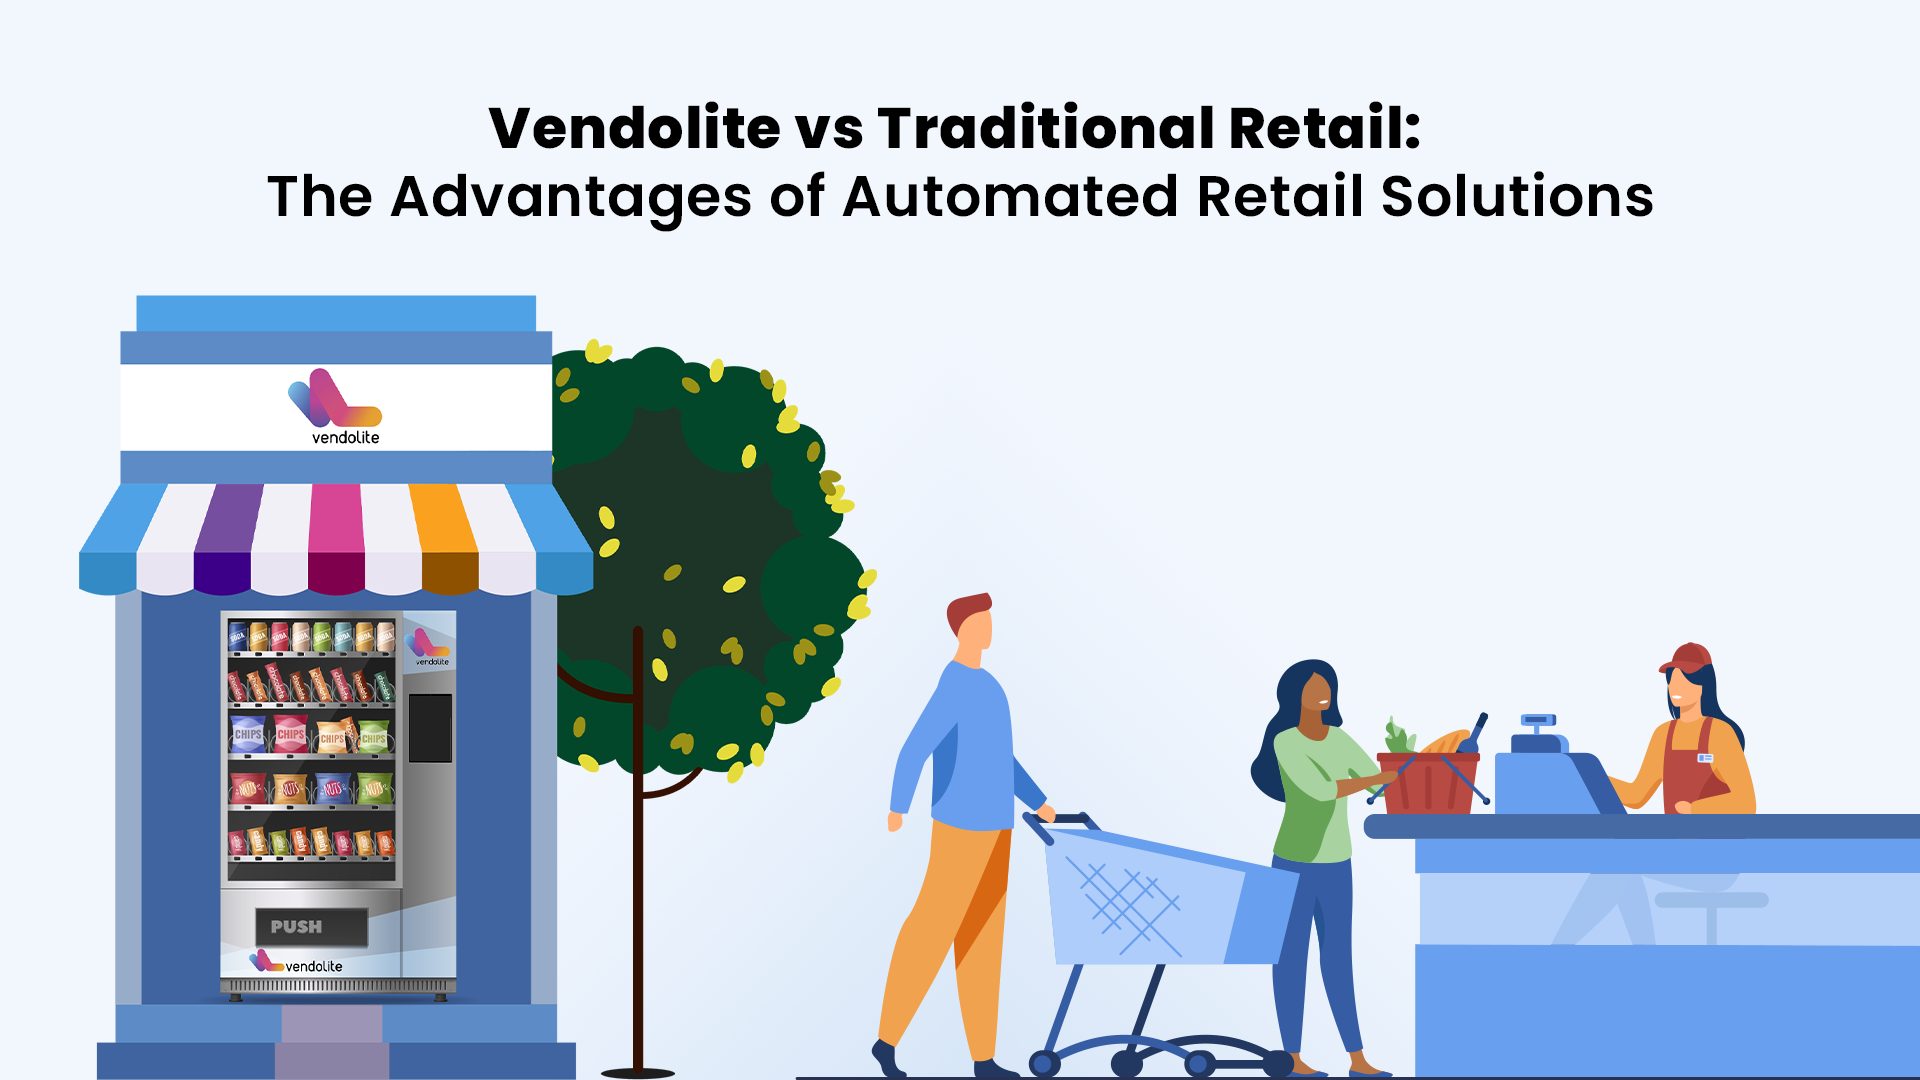 Vendolite vs. Traditional Retail: The Advantages of Automated Retail Solutions